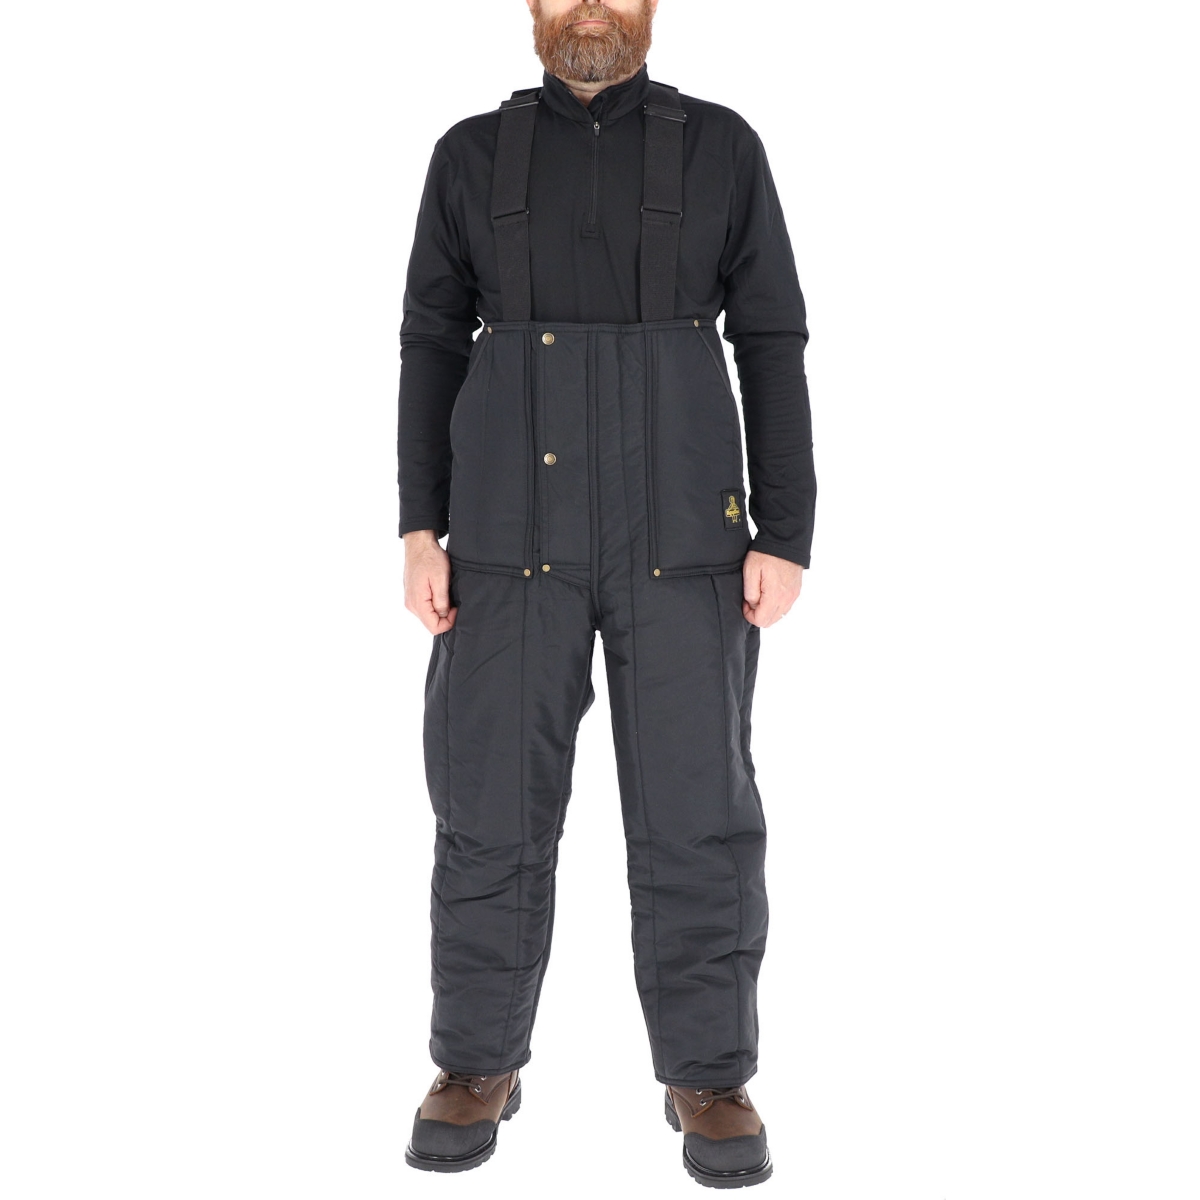 Men's Iron-Tuff Insulated Low Bib Overalls -50F Cold Protection - Navy